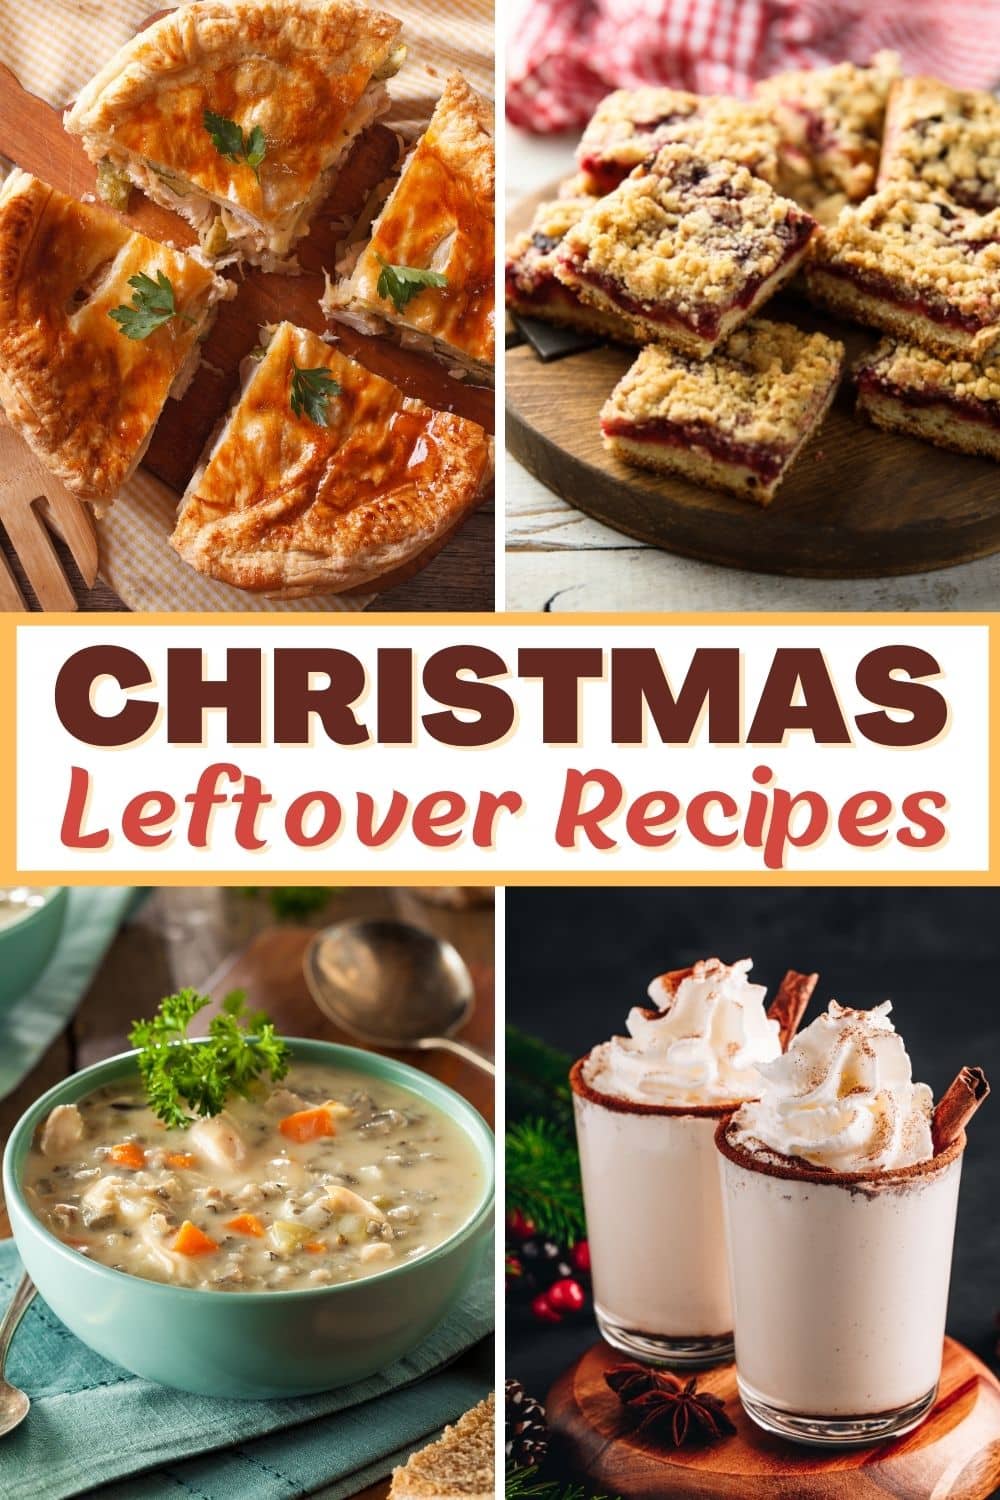 25 Christmas Leftovers Recipes You’ll Love - Insanely Good